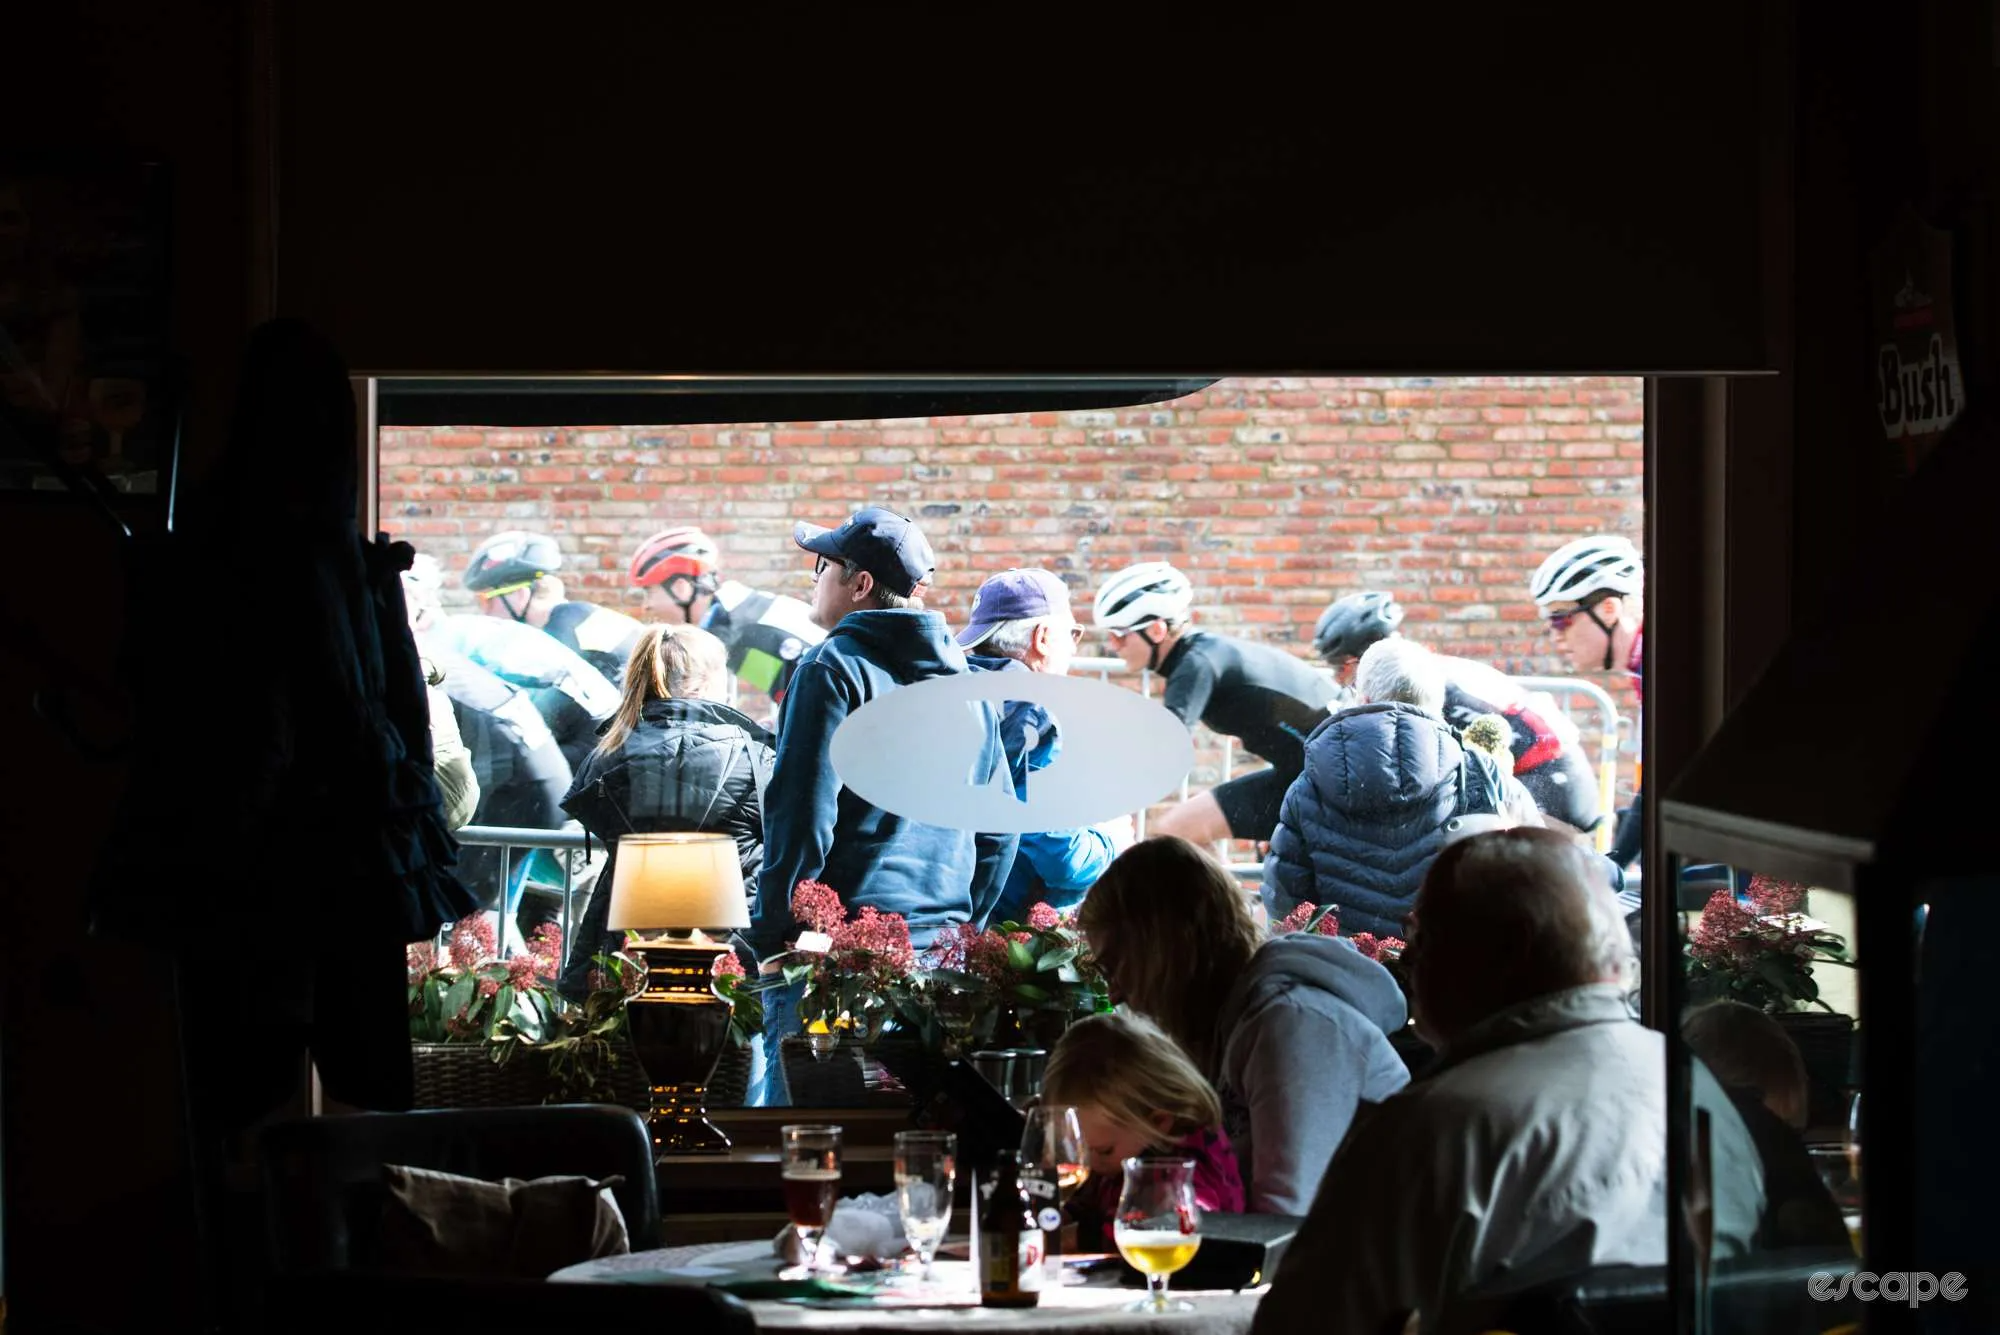 Fans watch a bike race from inside a restaurant, as riders pass by outside the window.